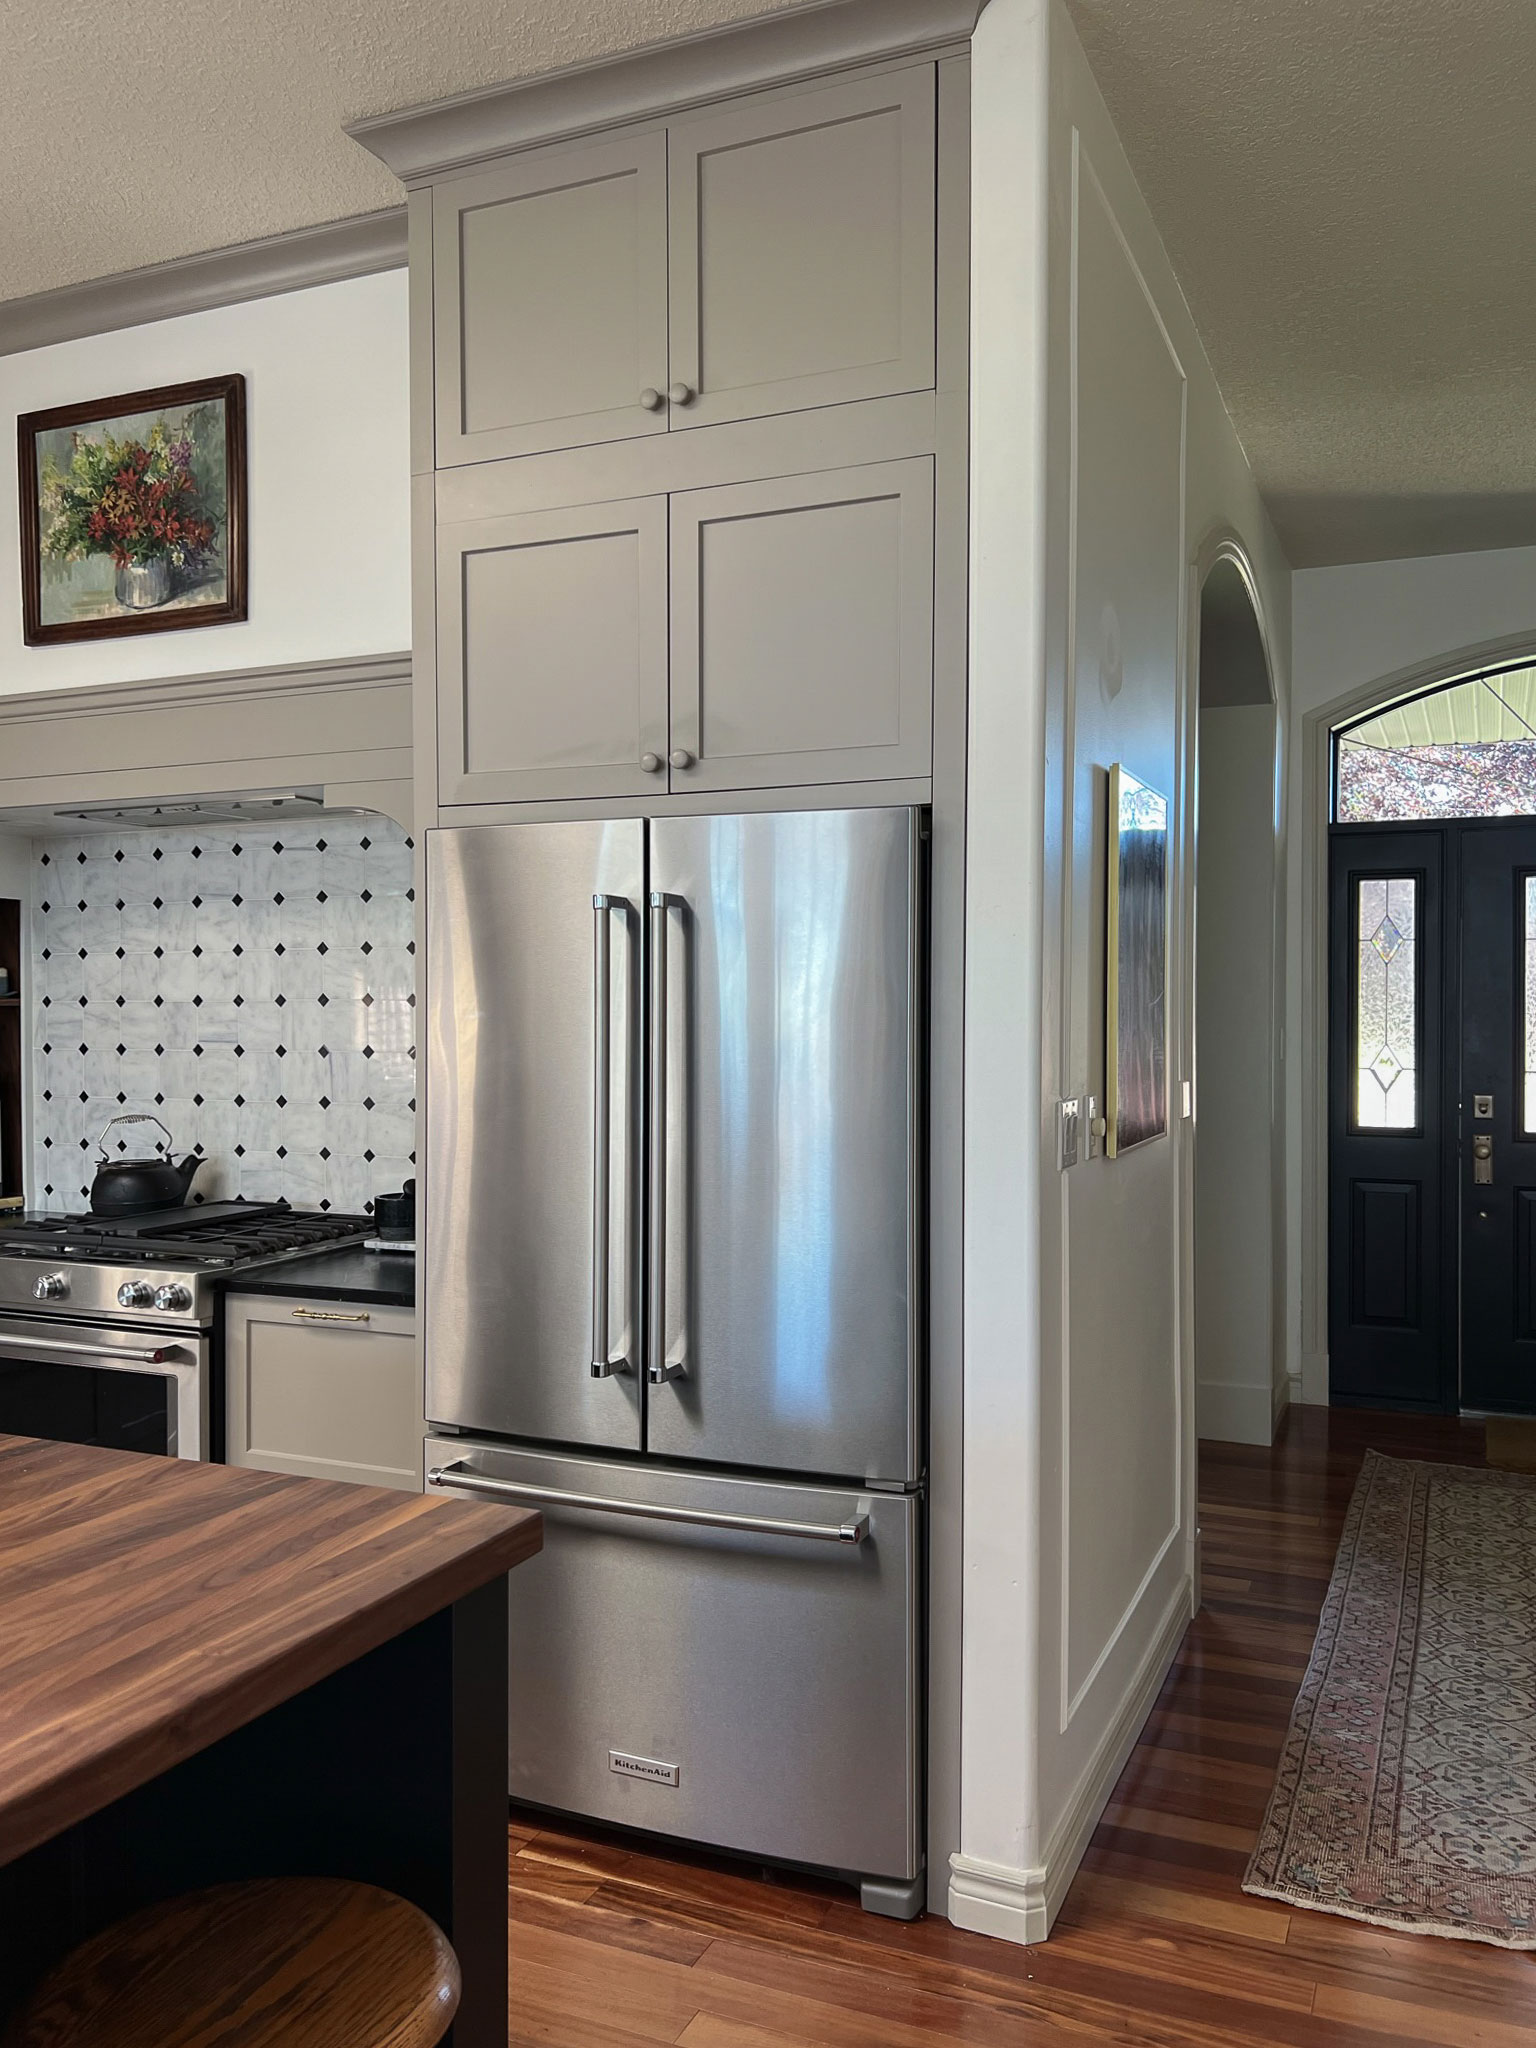 How to Make Your Refrigerator Look Built-In